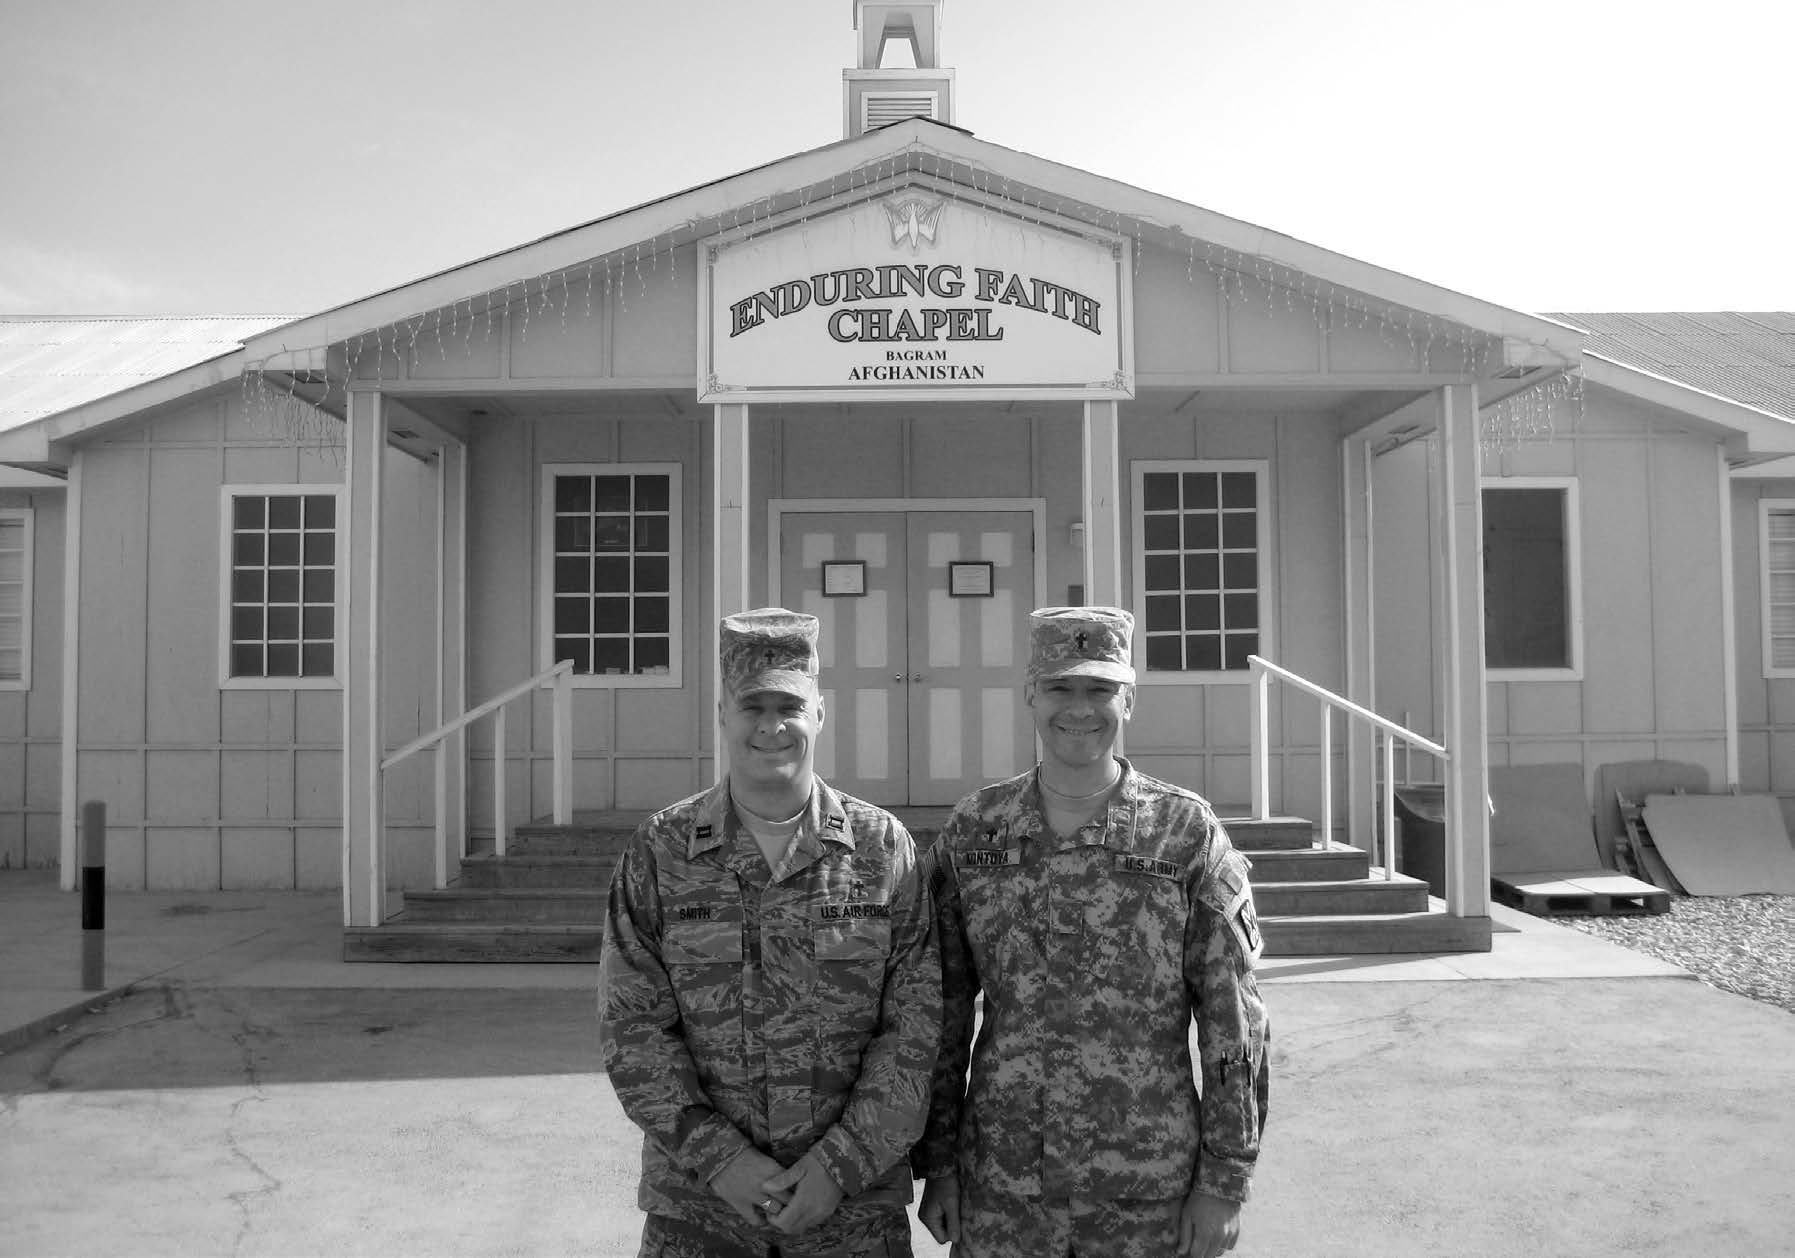 Latter-day Saint chaplains Smith and Montoya stand in front of the Enduring Faith Chapel at Bagram, Afghanistan. Courtesy of Eugene J. Wikle.